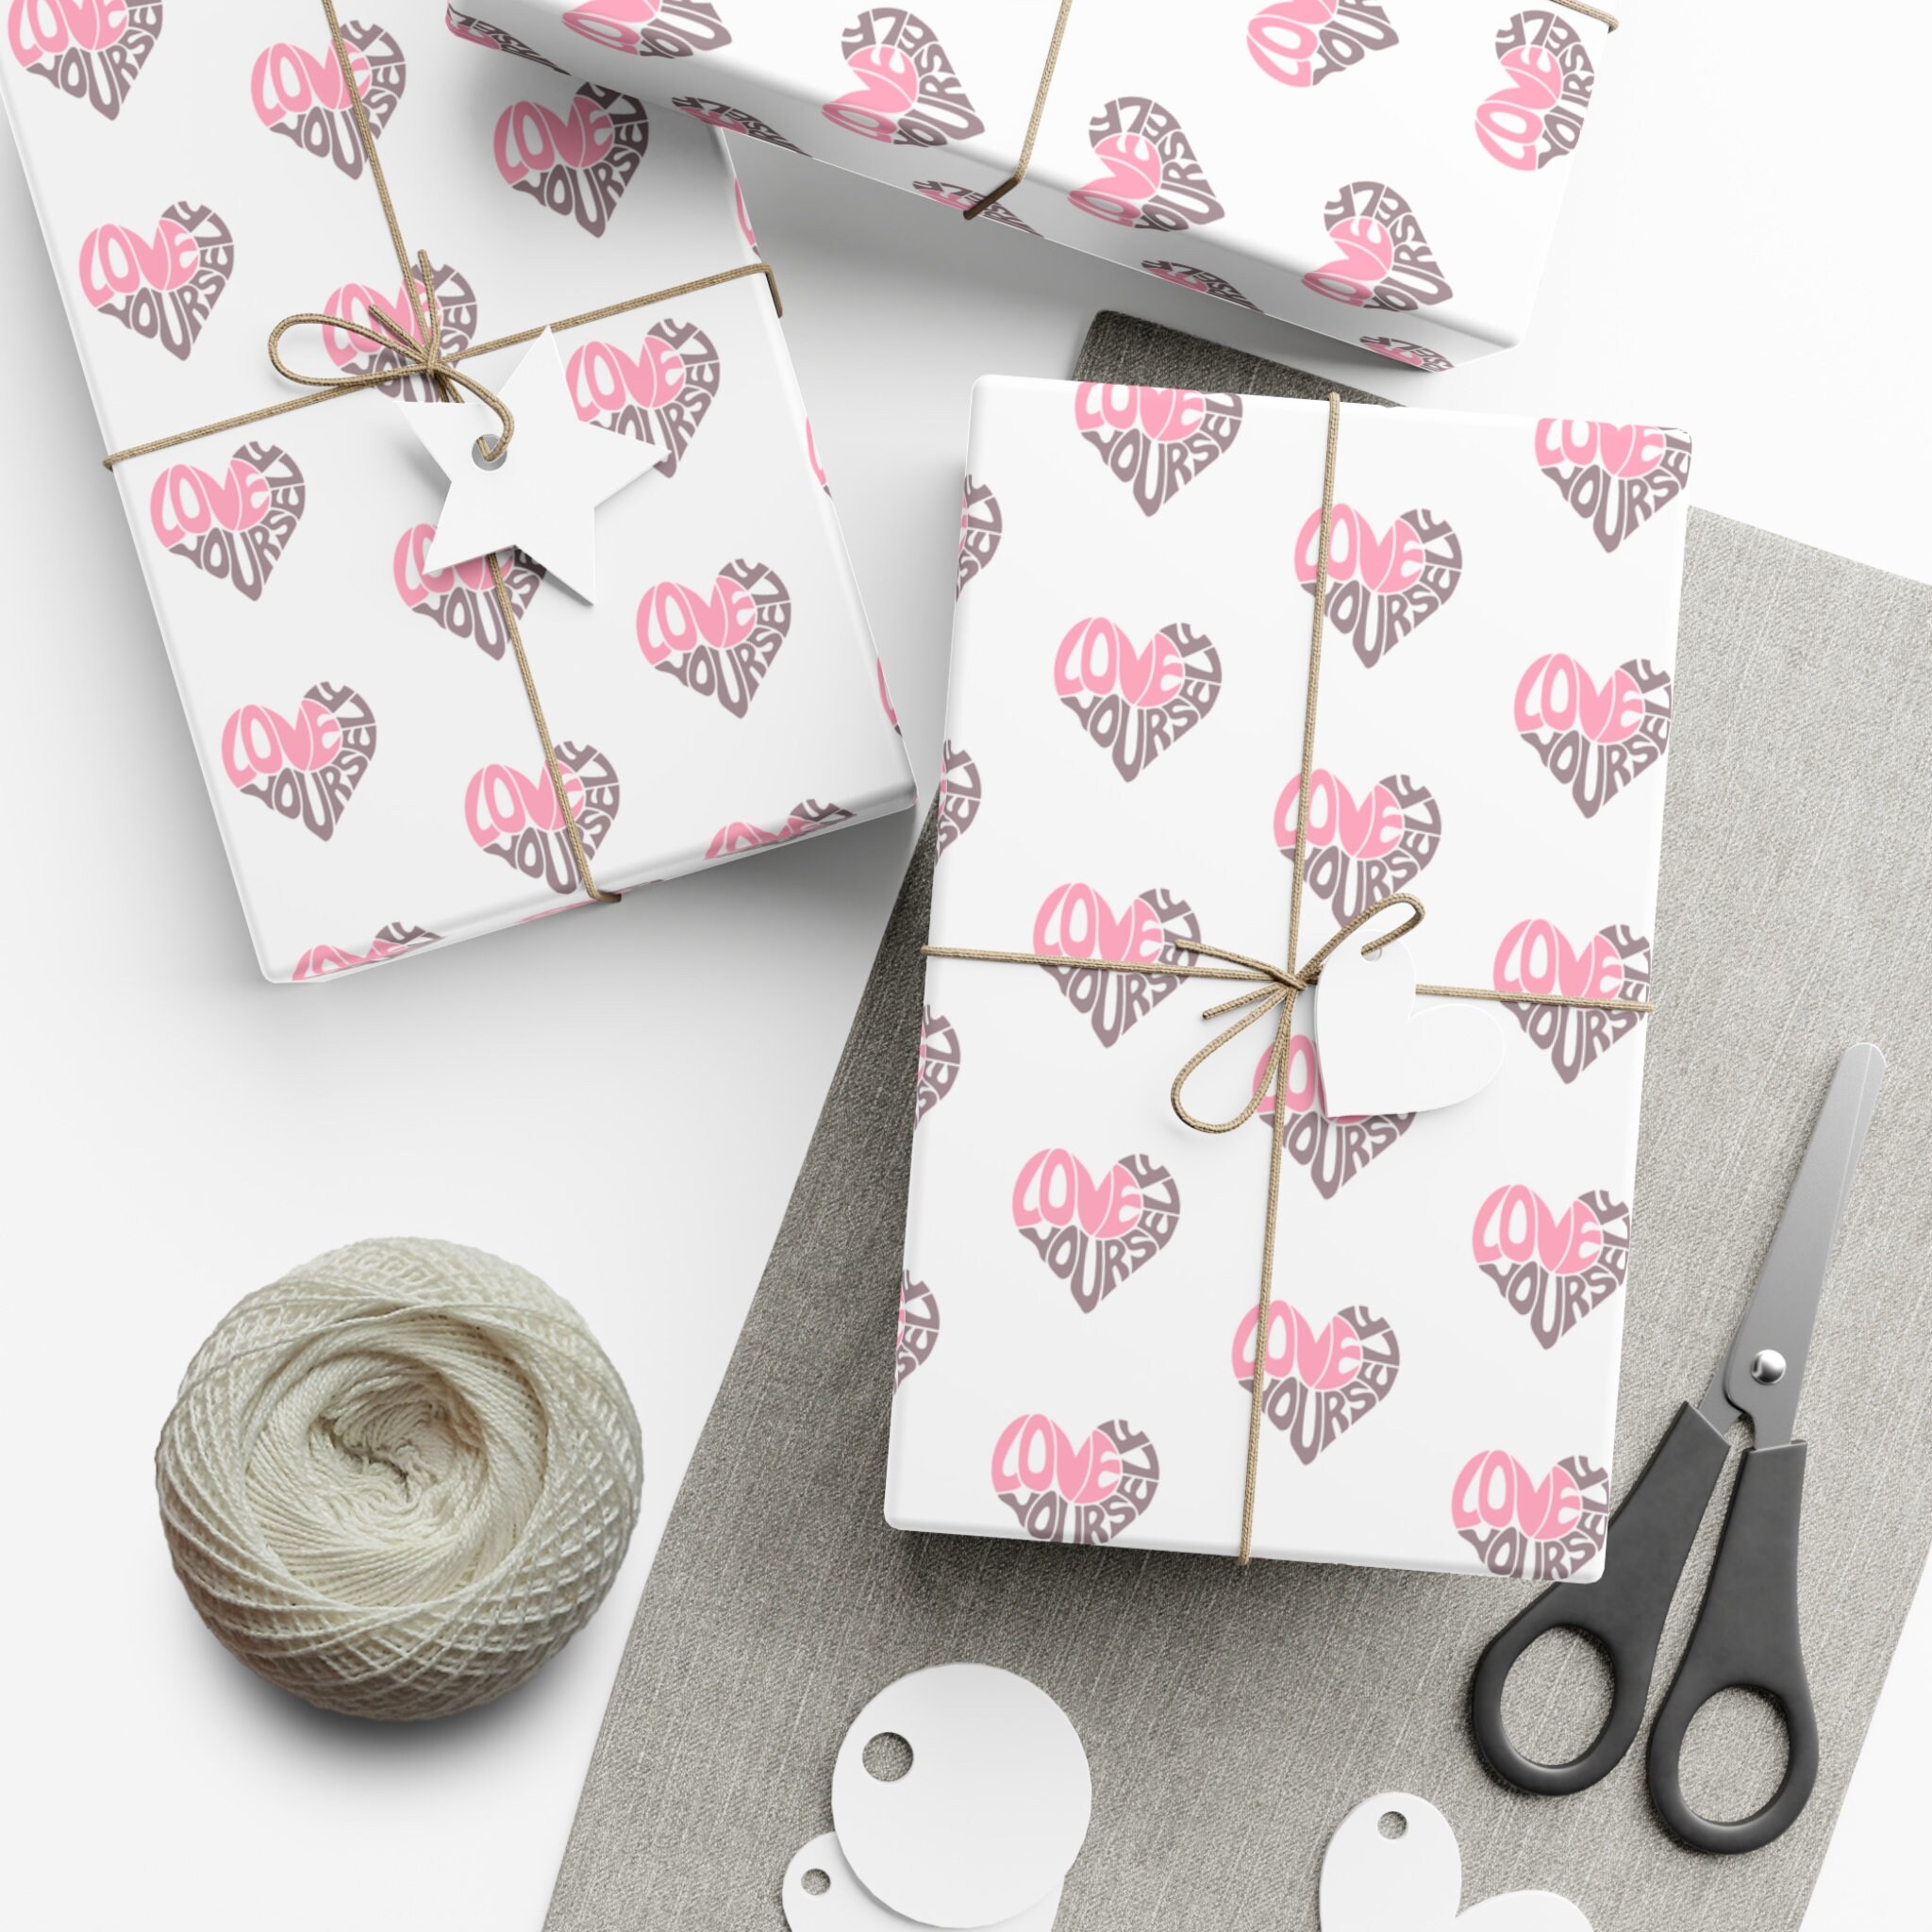 Everything you need to wrap gifts like a professional - Reviewed